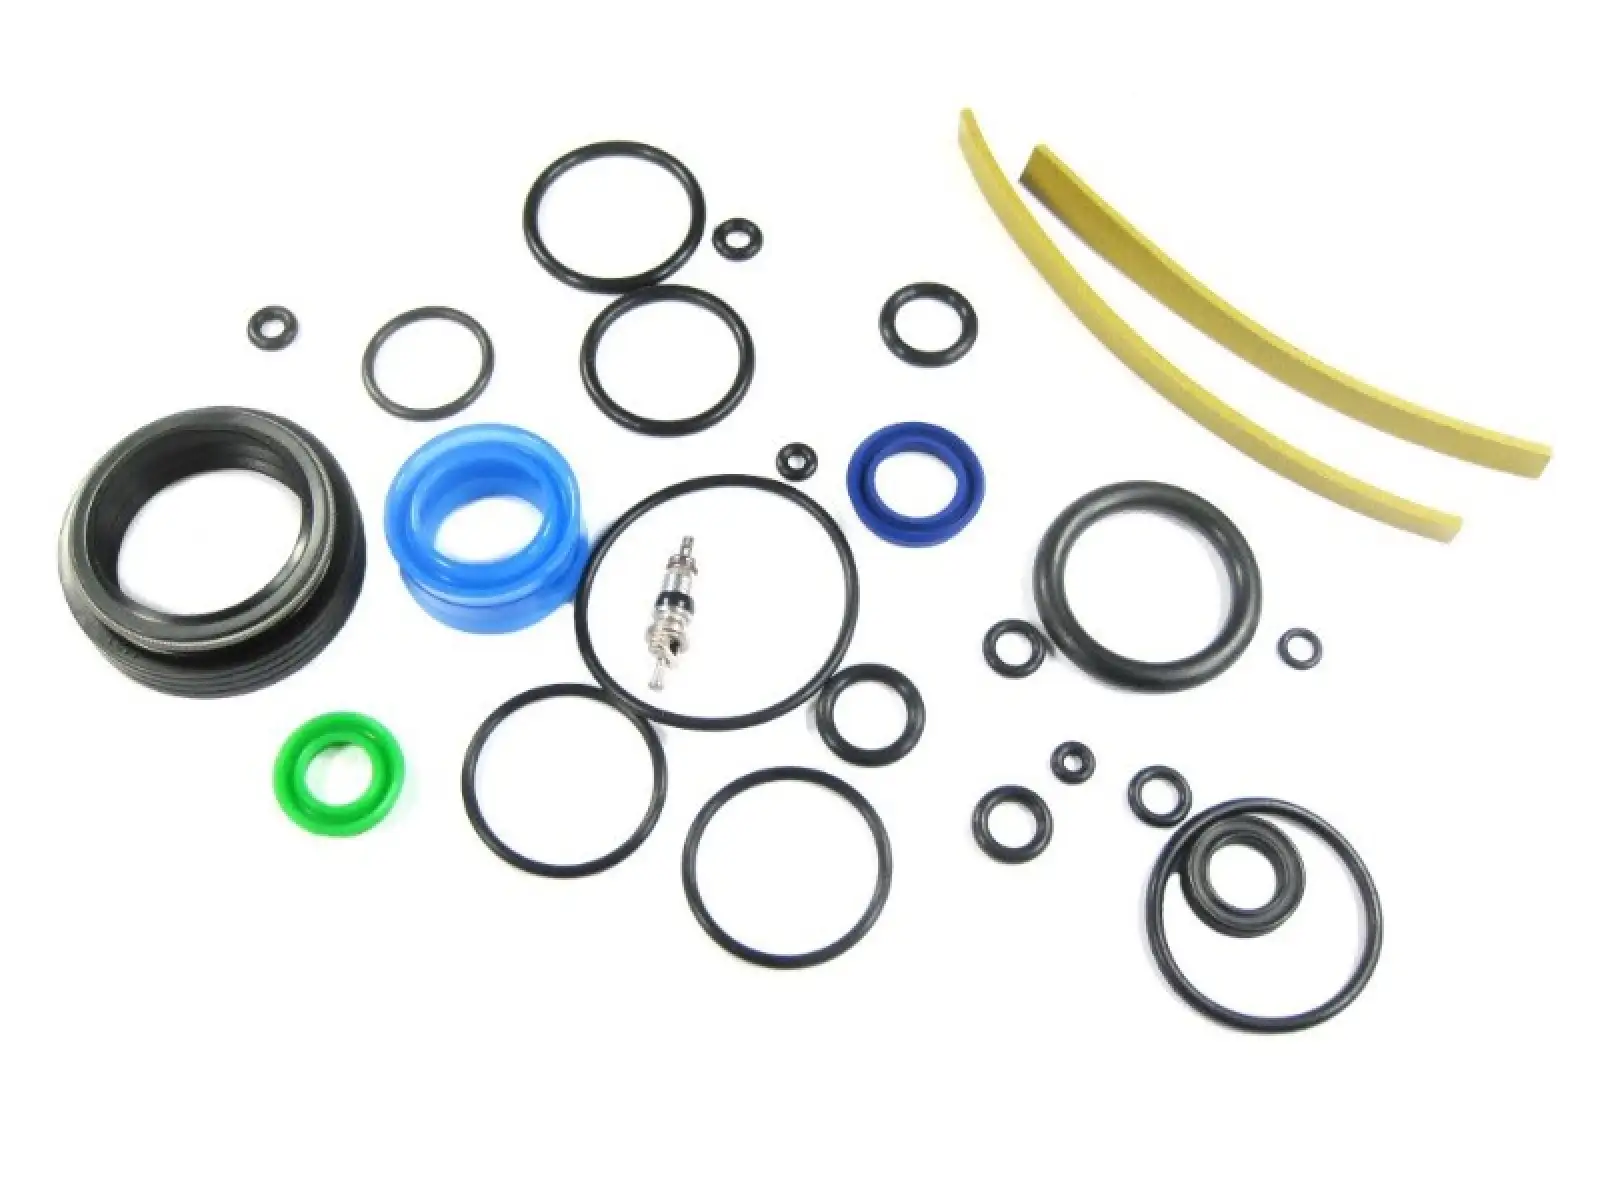 ANSO Suspension Service Kit 1 year for Reverb Stealth A2 - C1 seatposts